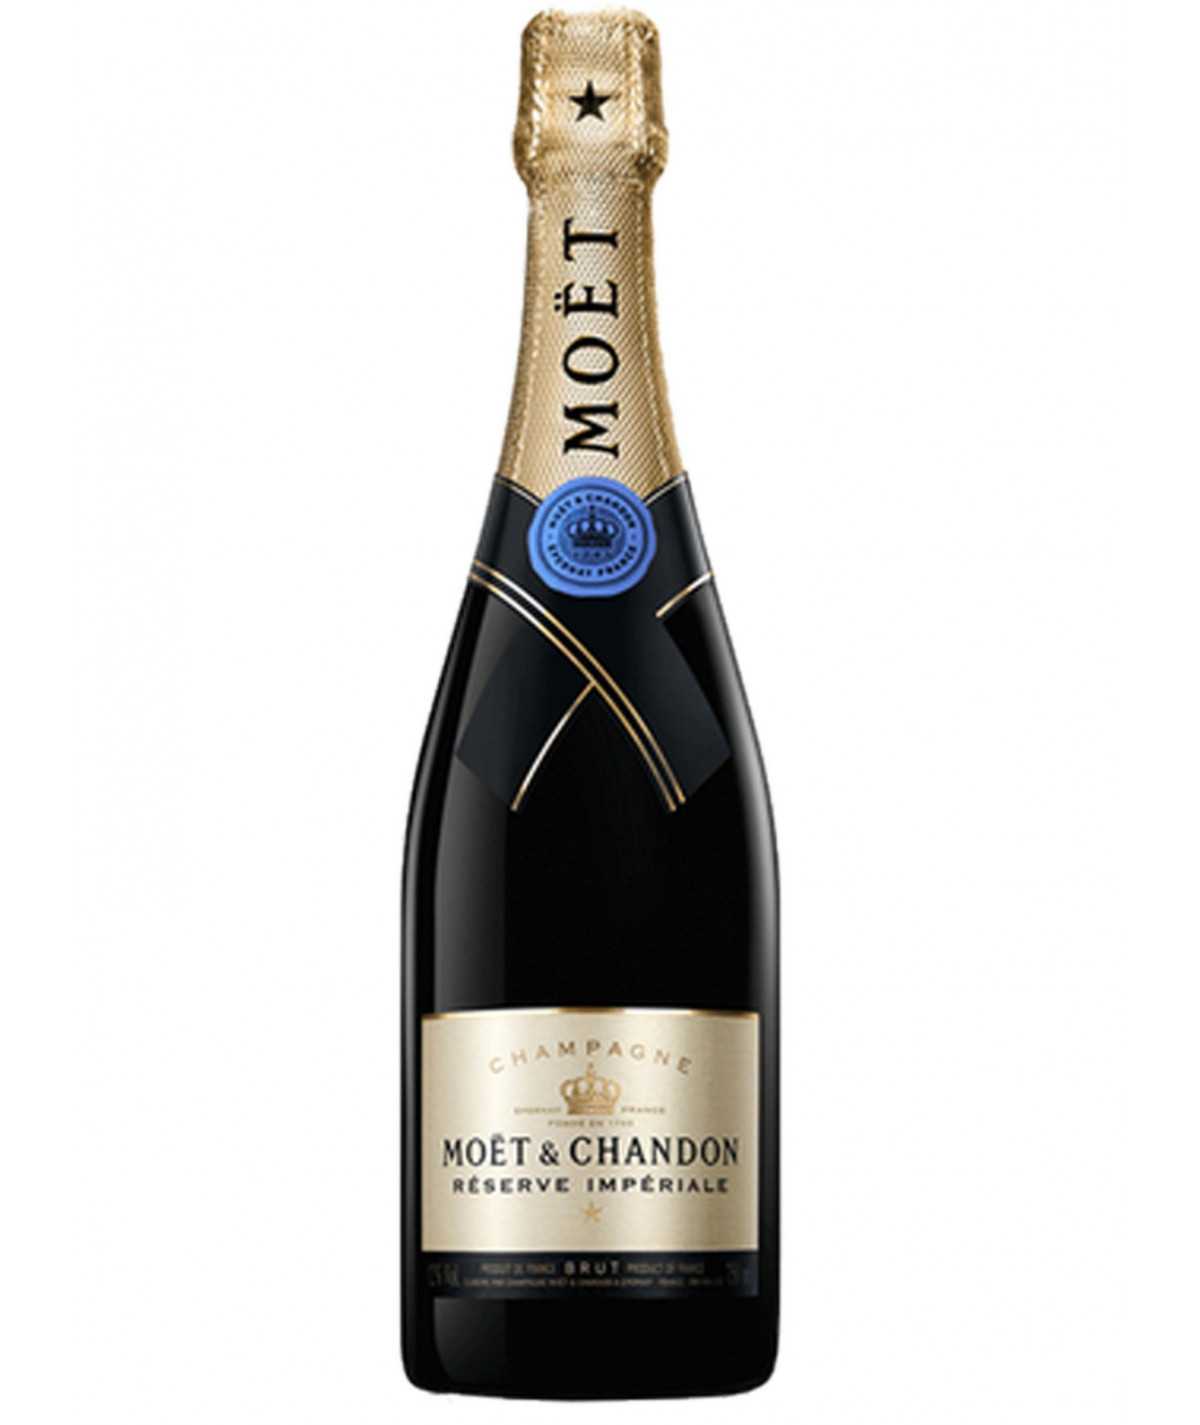 Champagne MOET & CHANDON Reserve Imperiale